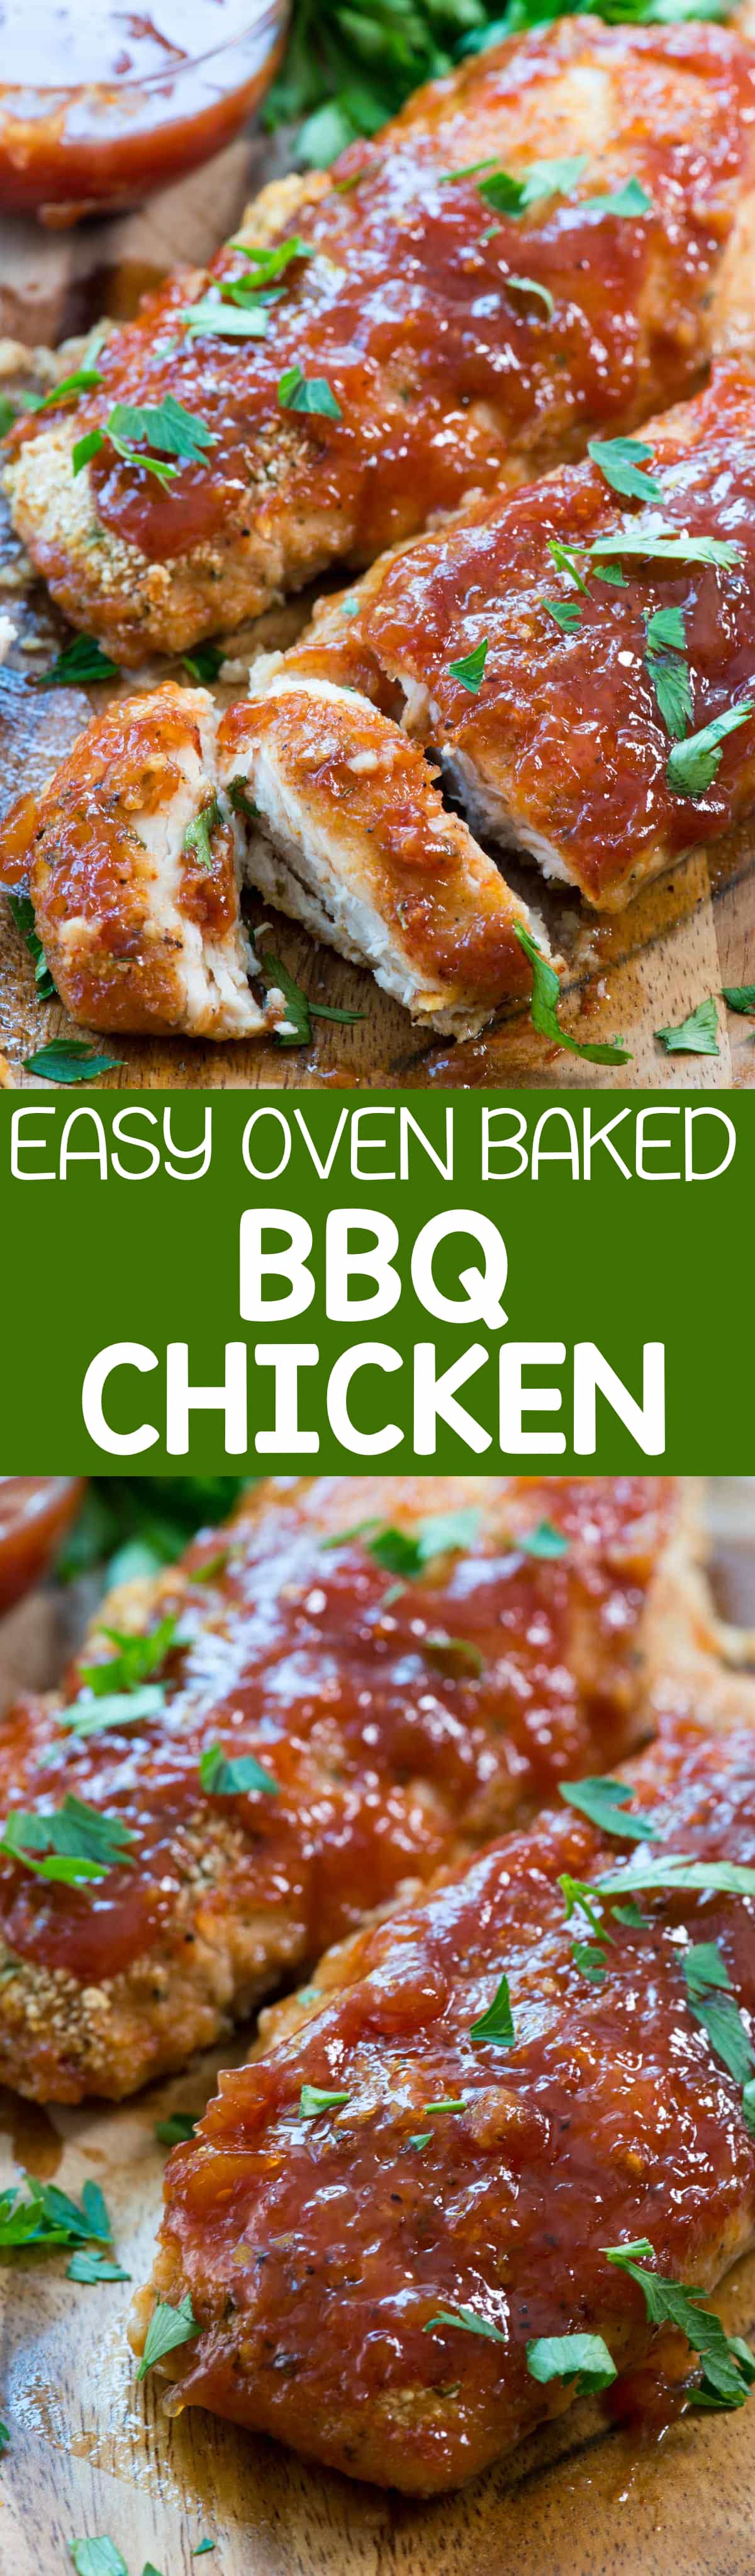 Oven Baked BBQ Chicken - easy, from scratch!